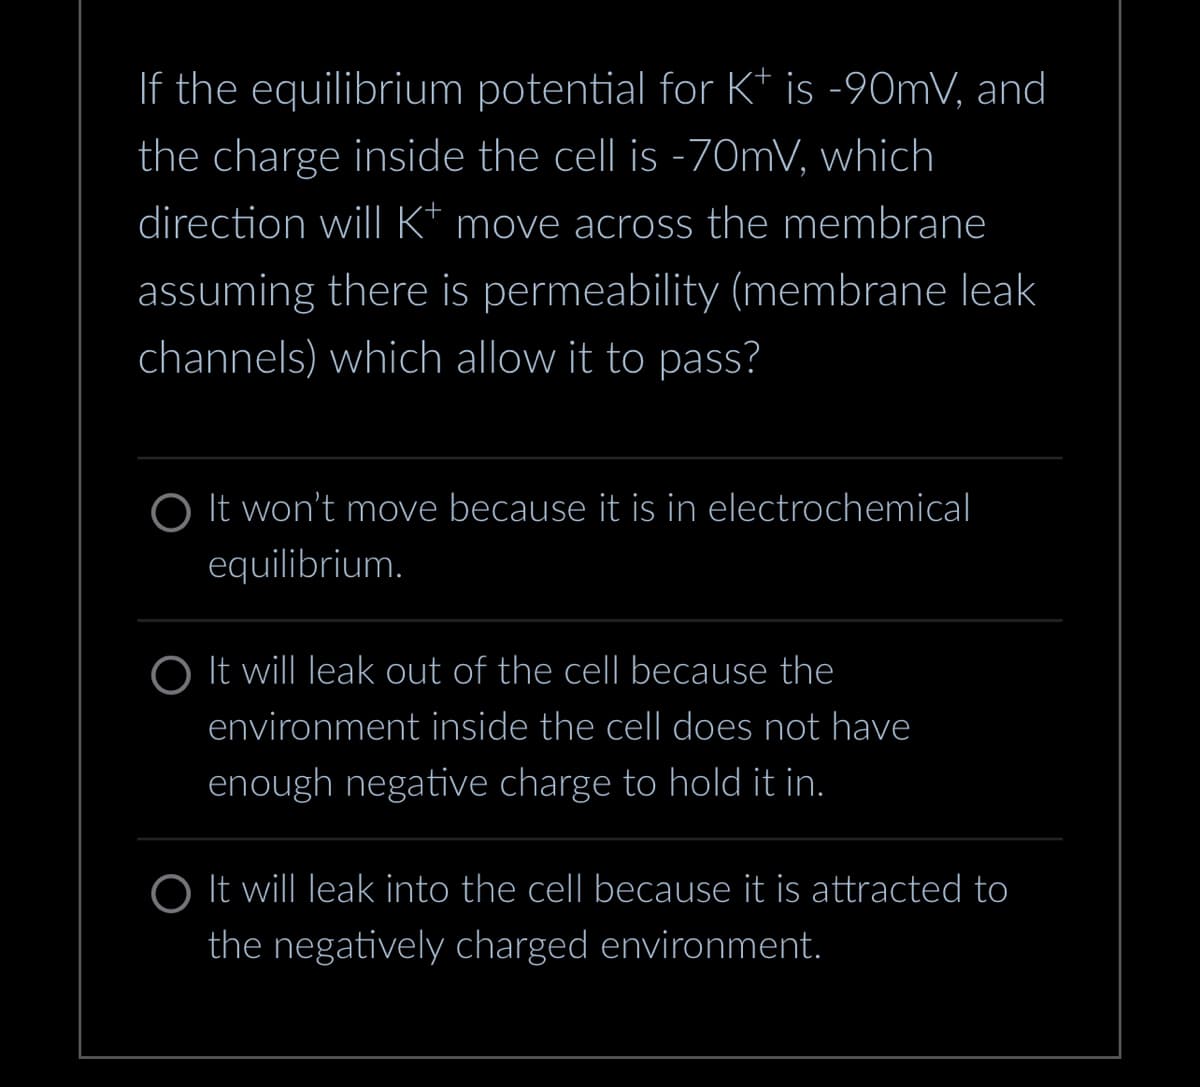 If the equilibrium potential for Kt is -90mV, and
the charge inside the cell is -70mV, which
direction will K* move across the membrane
assuming there is permeability (membrane leak
channels) which allow it to pass?
O It won't move because it is in electrochemical
equilibrium.
O It will leak out of the cell because the
environment inside the cell does not have
enough negative charge to hold it in.
O It will leak into the cell because it is attracted to
the negatively charged environment.